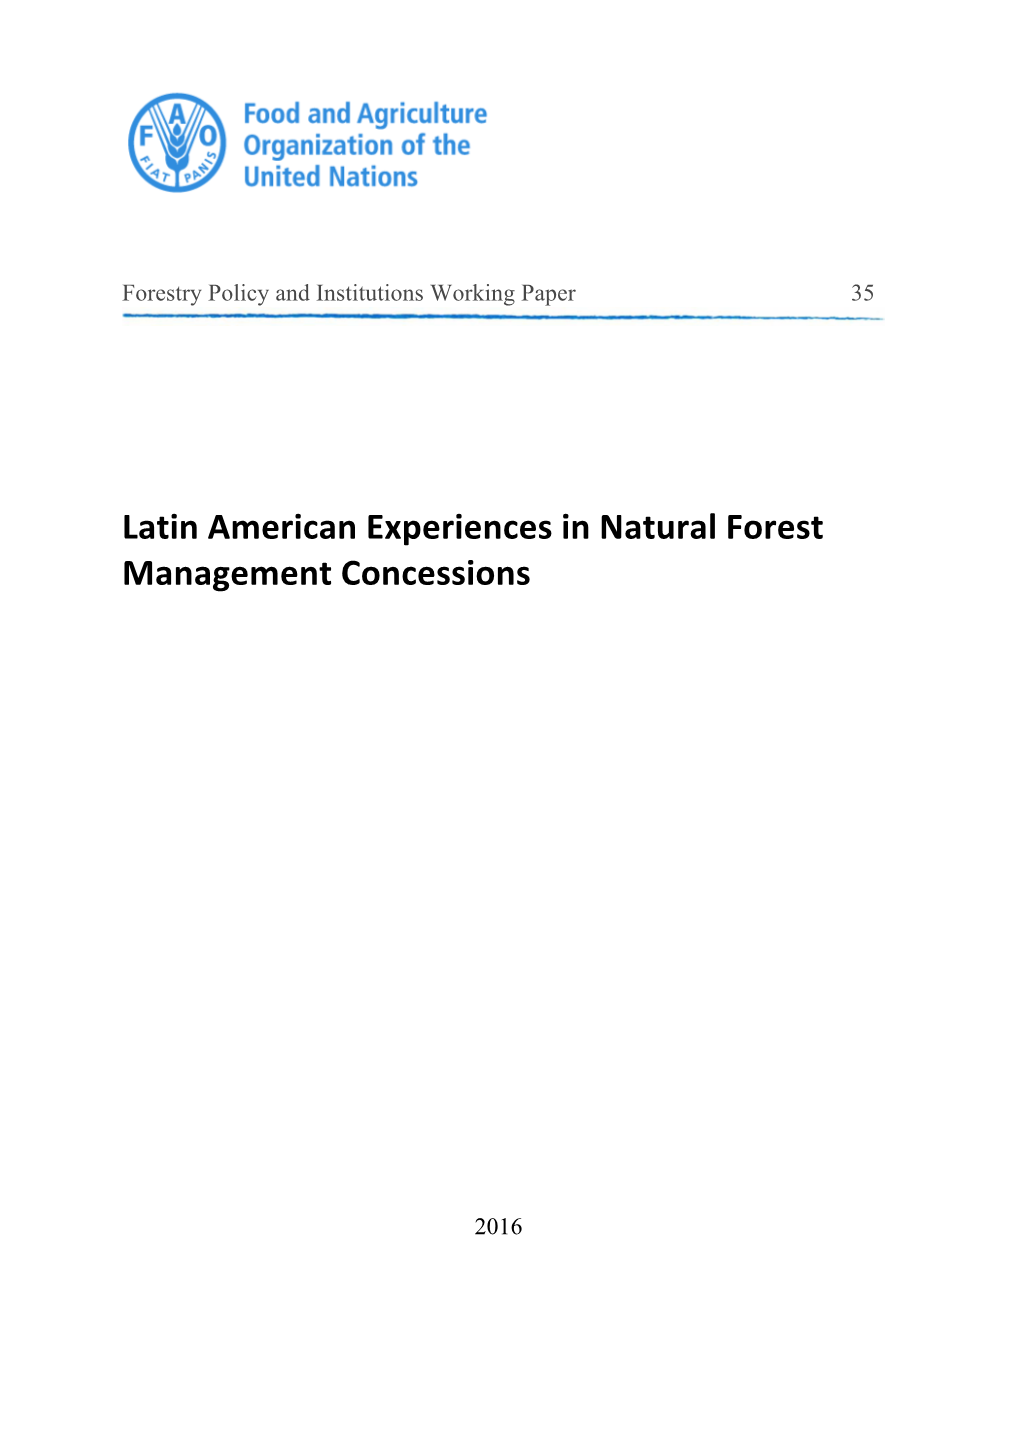 Latin American Experiences in Natural Forest Management Concessions